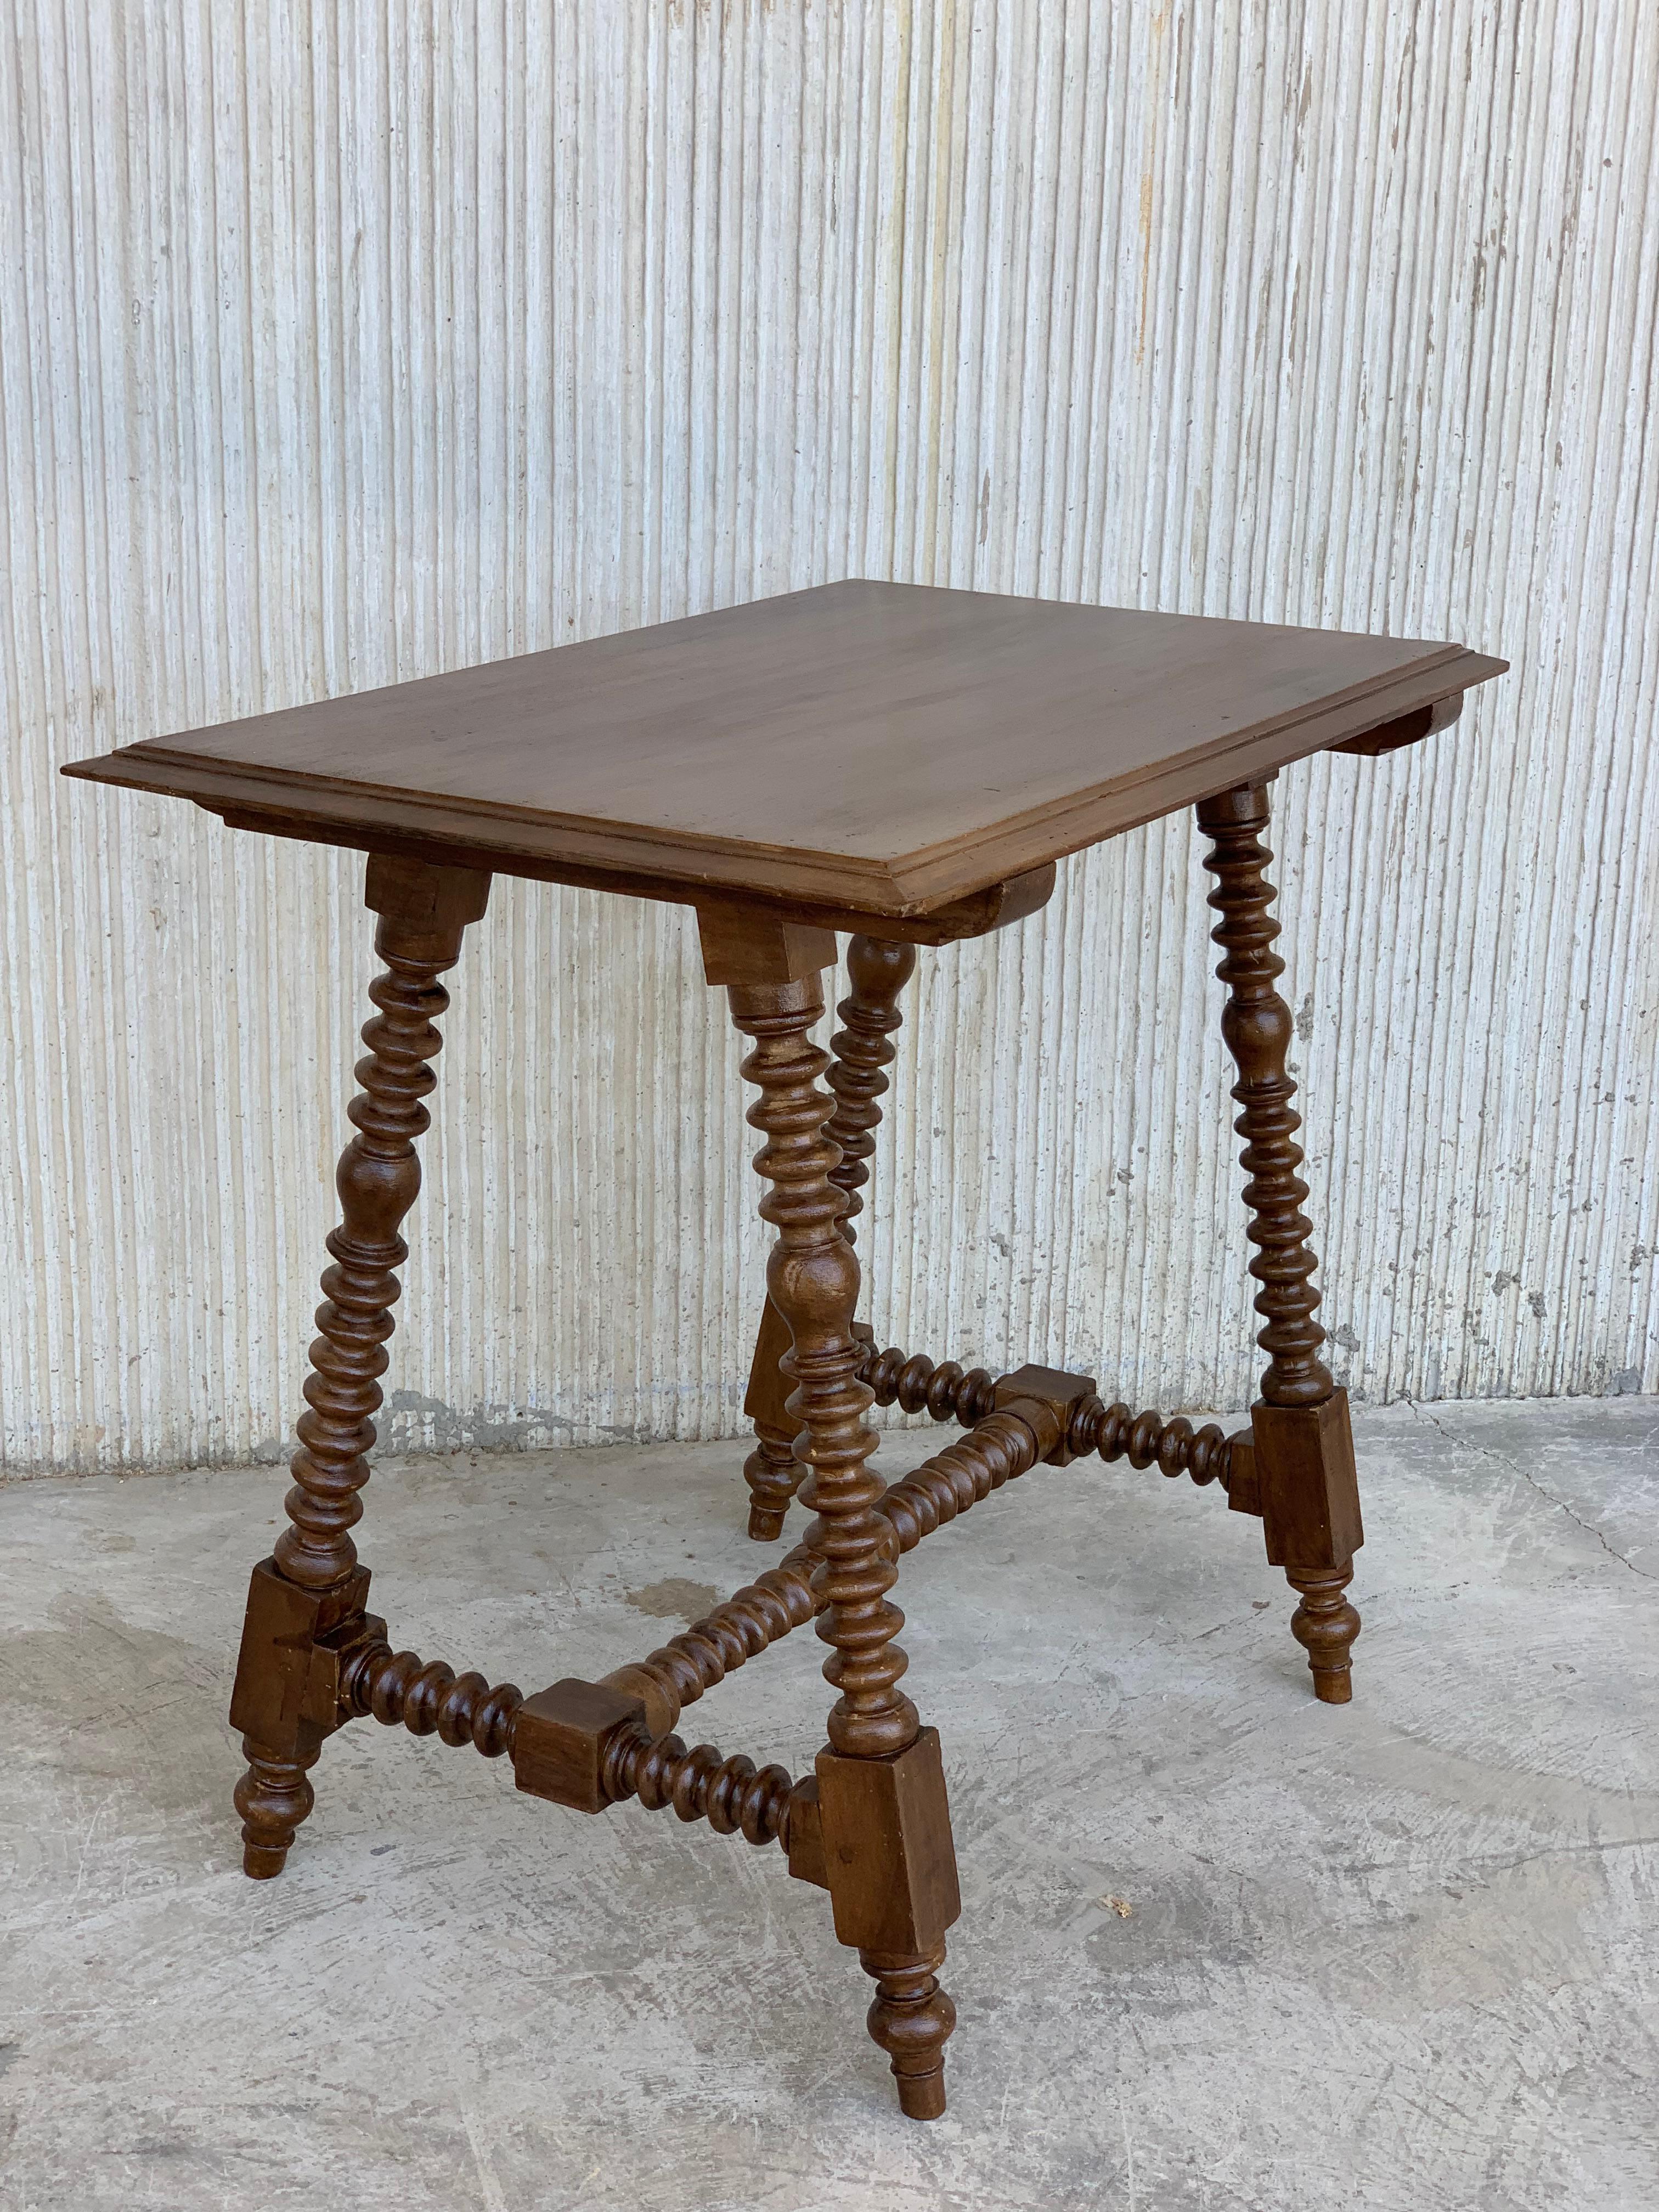 19th century Spanish Baroque ebonized side table with wood stretcher and top in walnut.